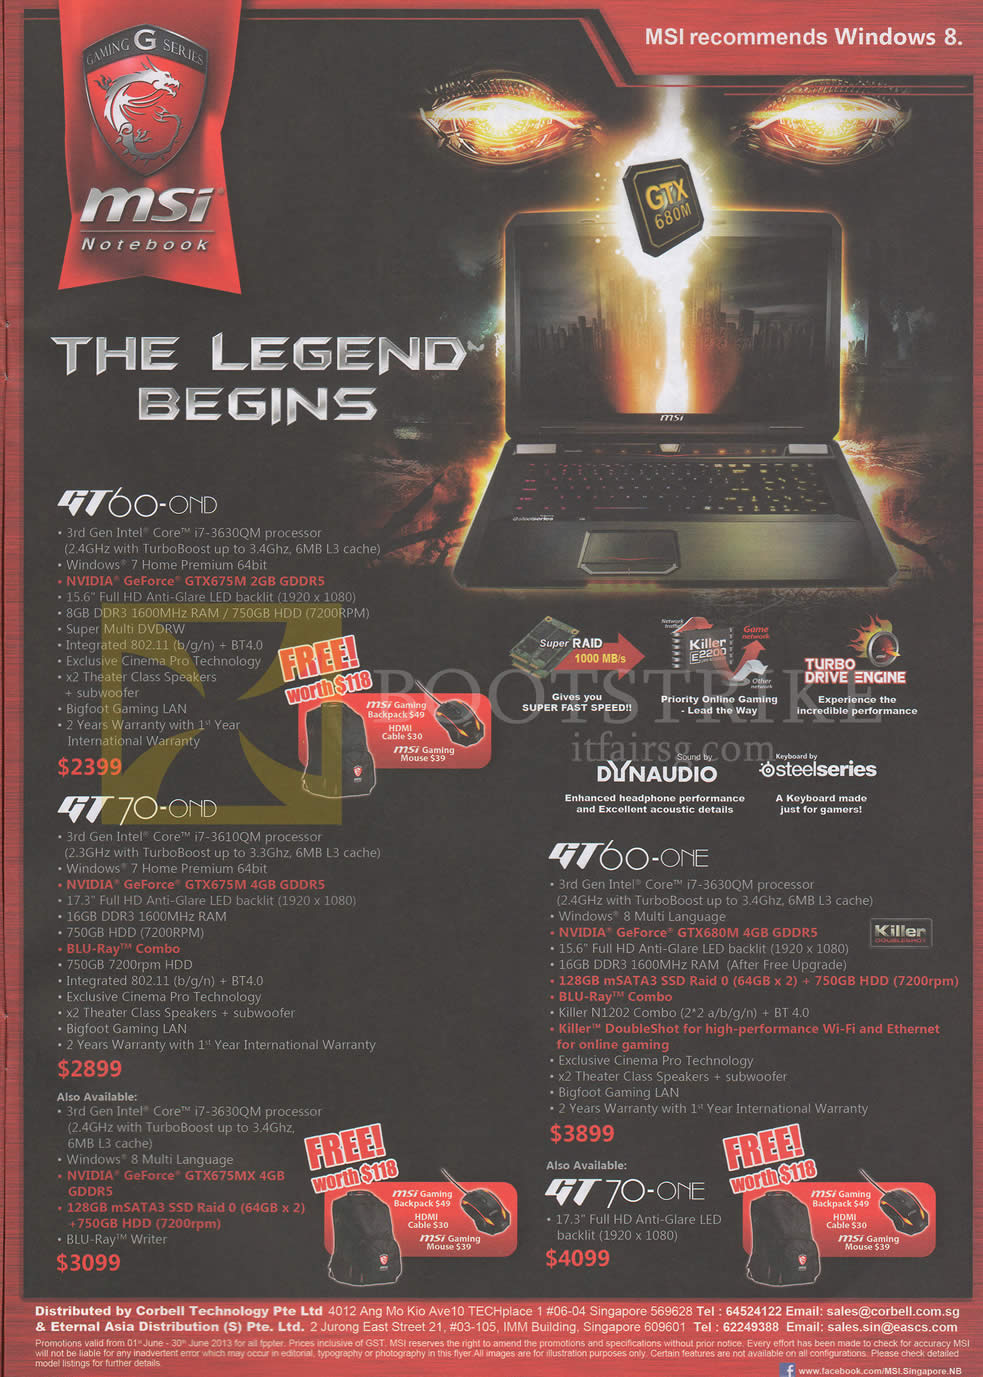 PC SHOW 2013 price list image brochure of MSI Notebooks GT60-0ND, GT70-0ND, GT60-0NE